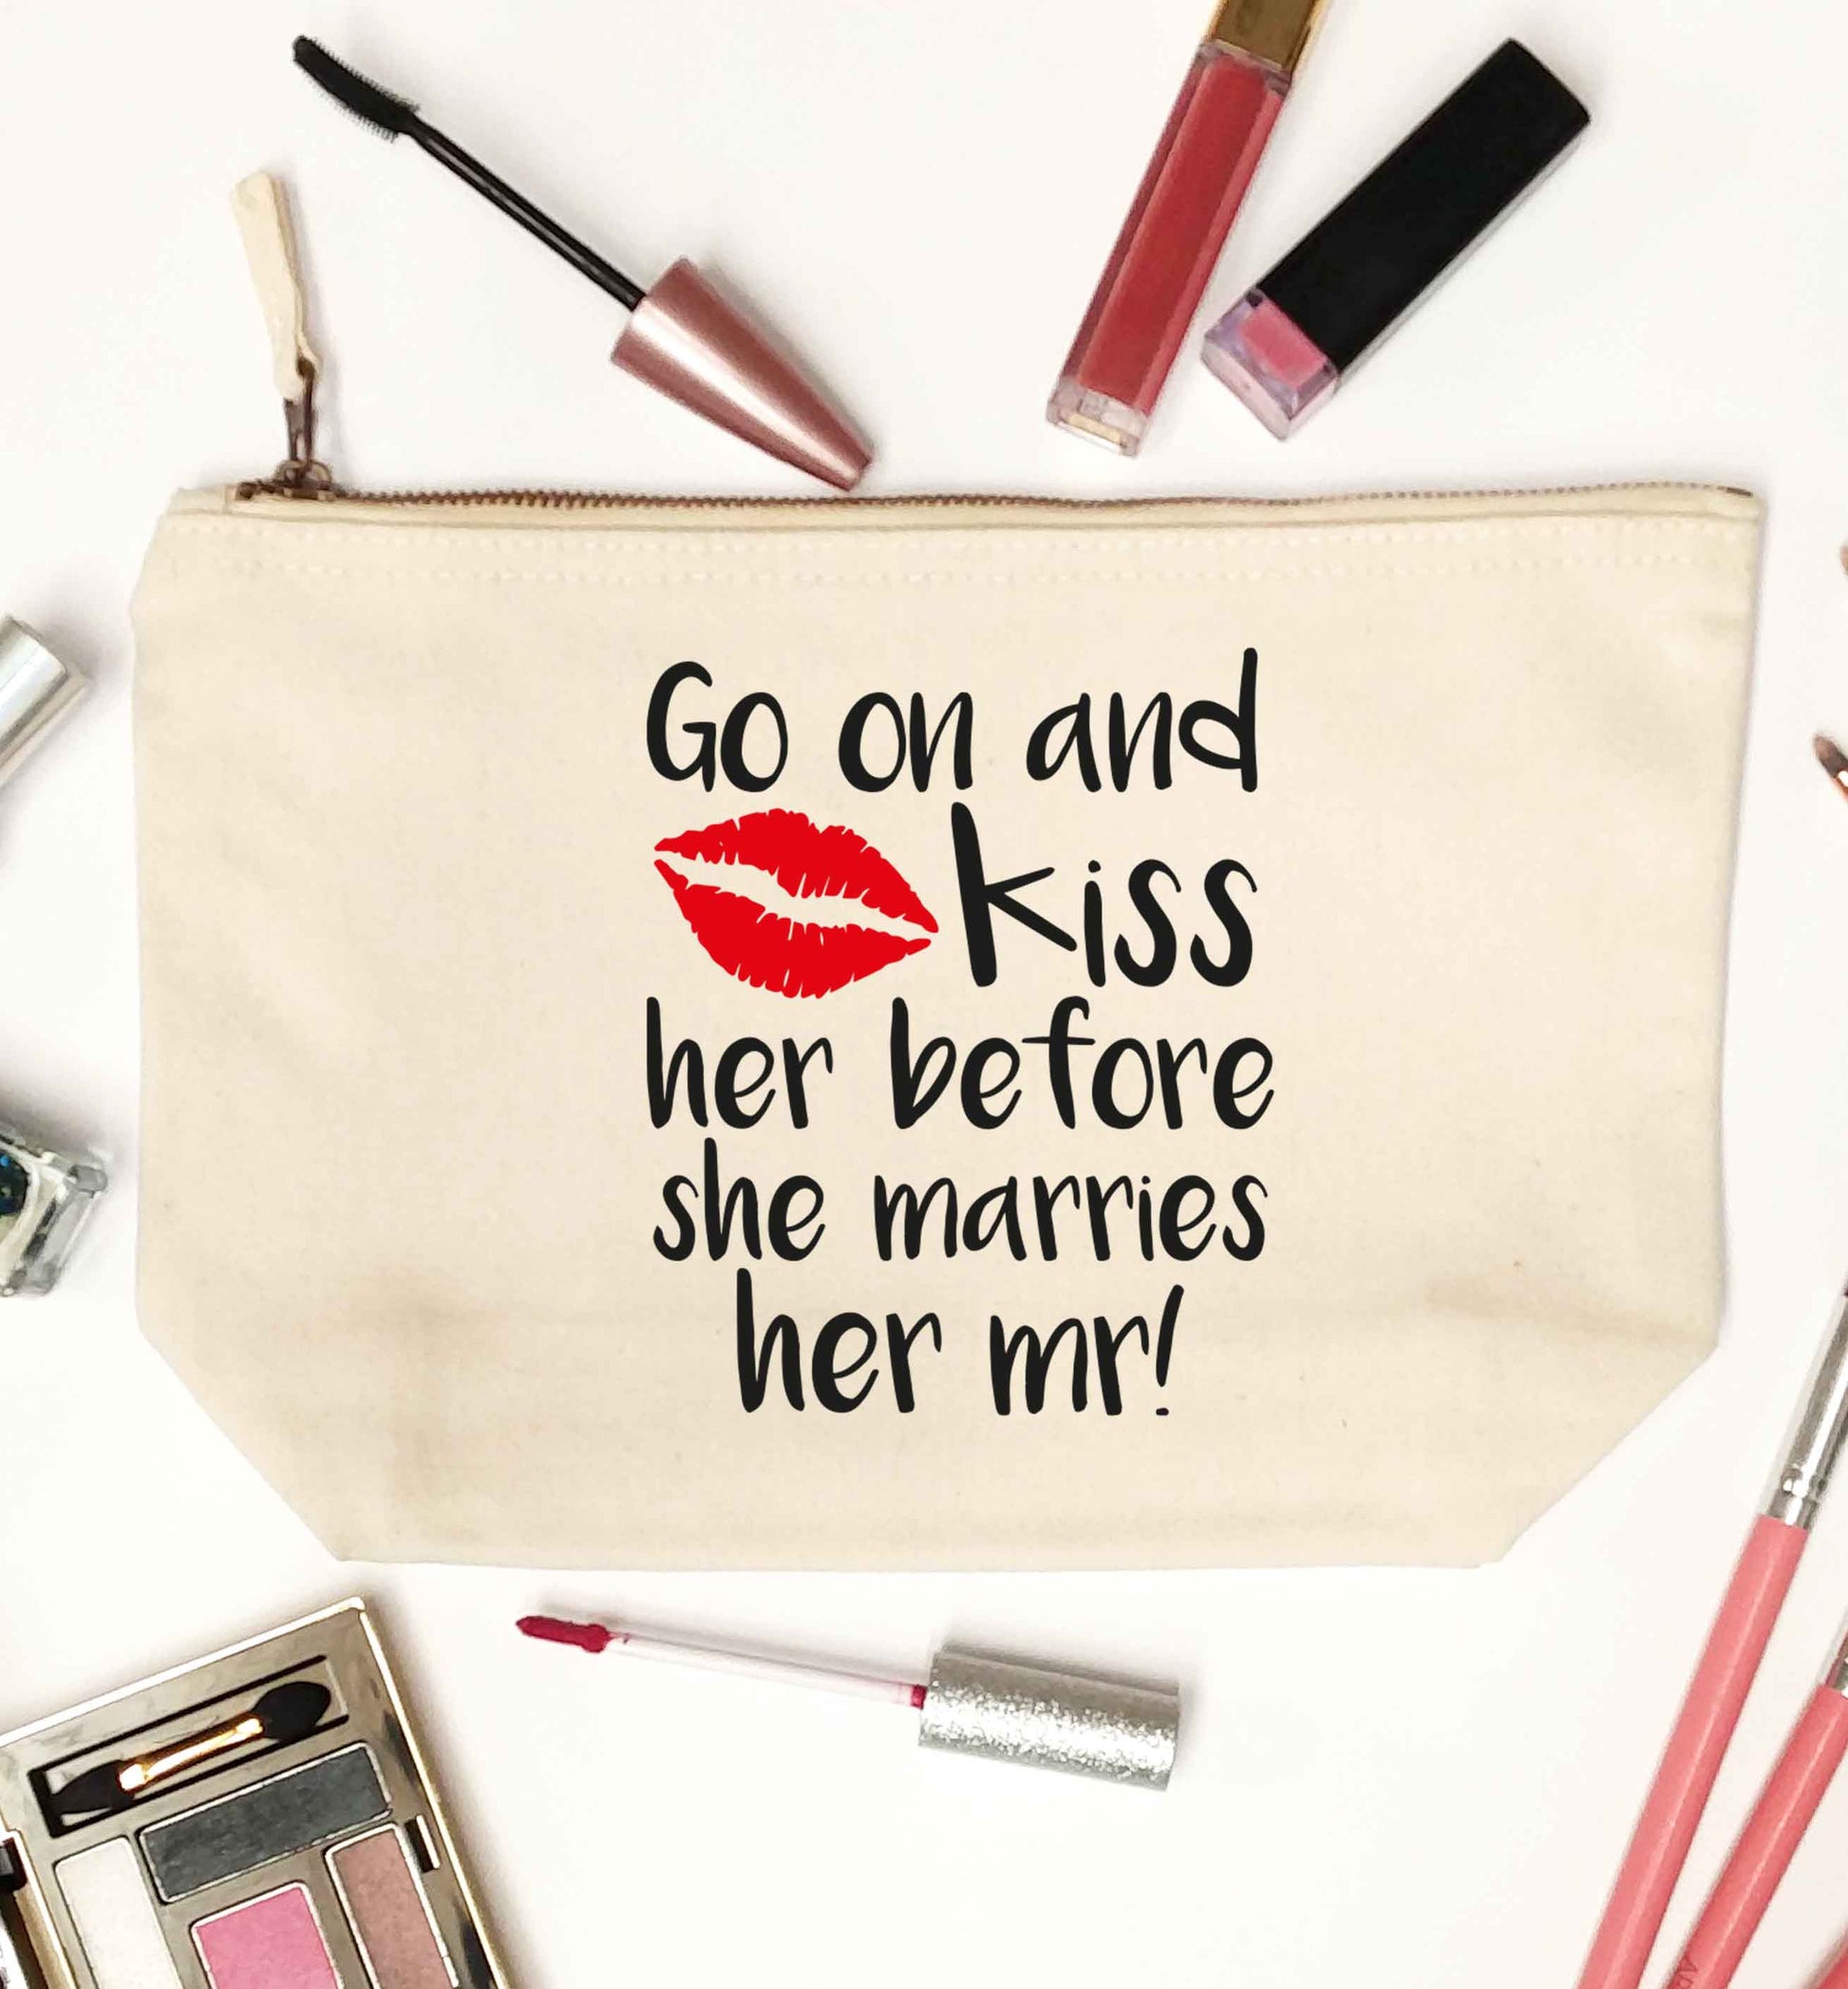 Kiss her before she marries her mr! natural makeup bag